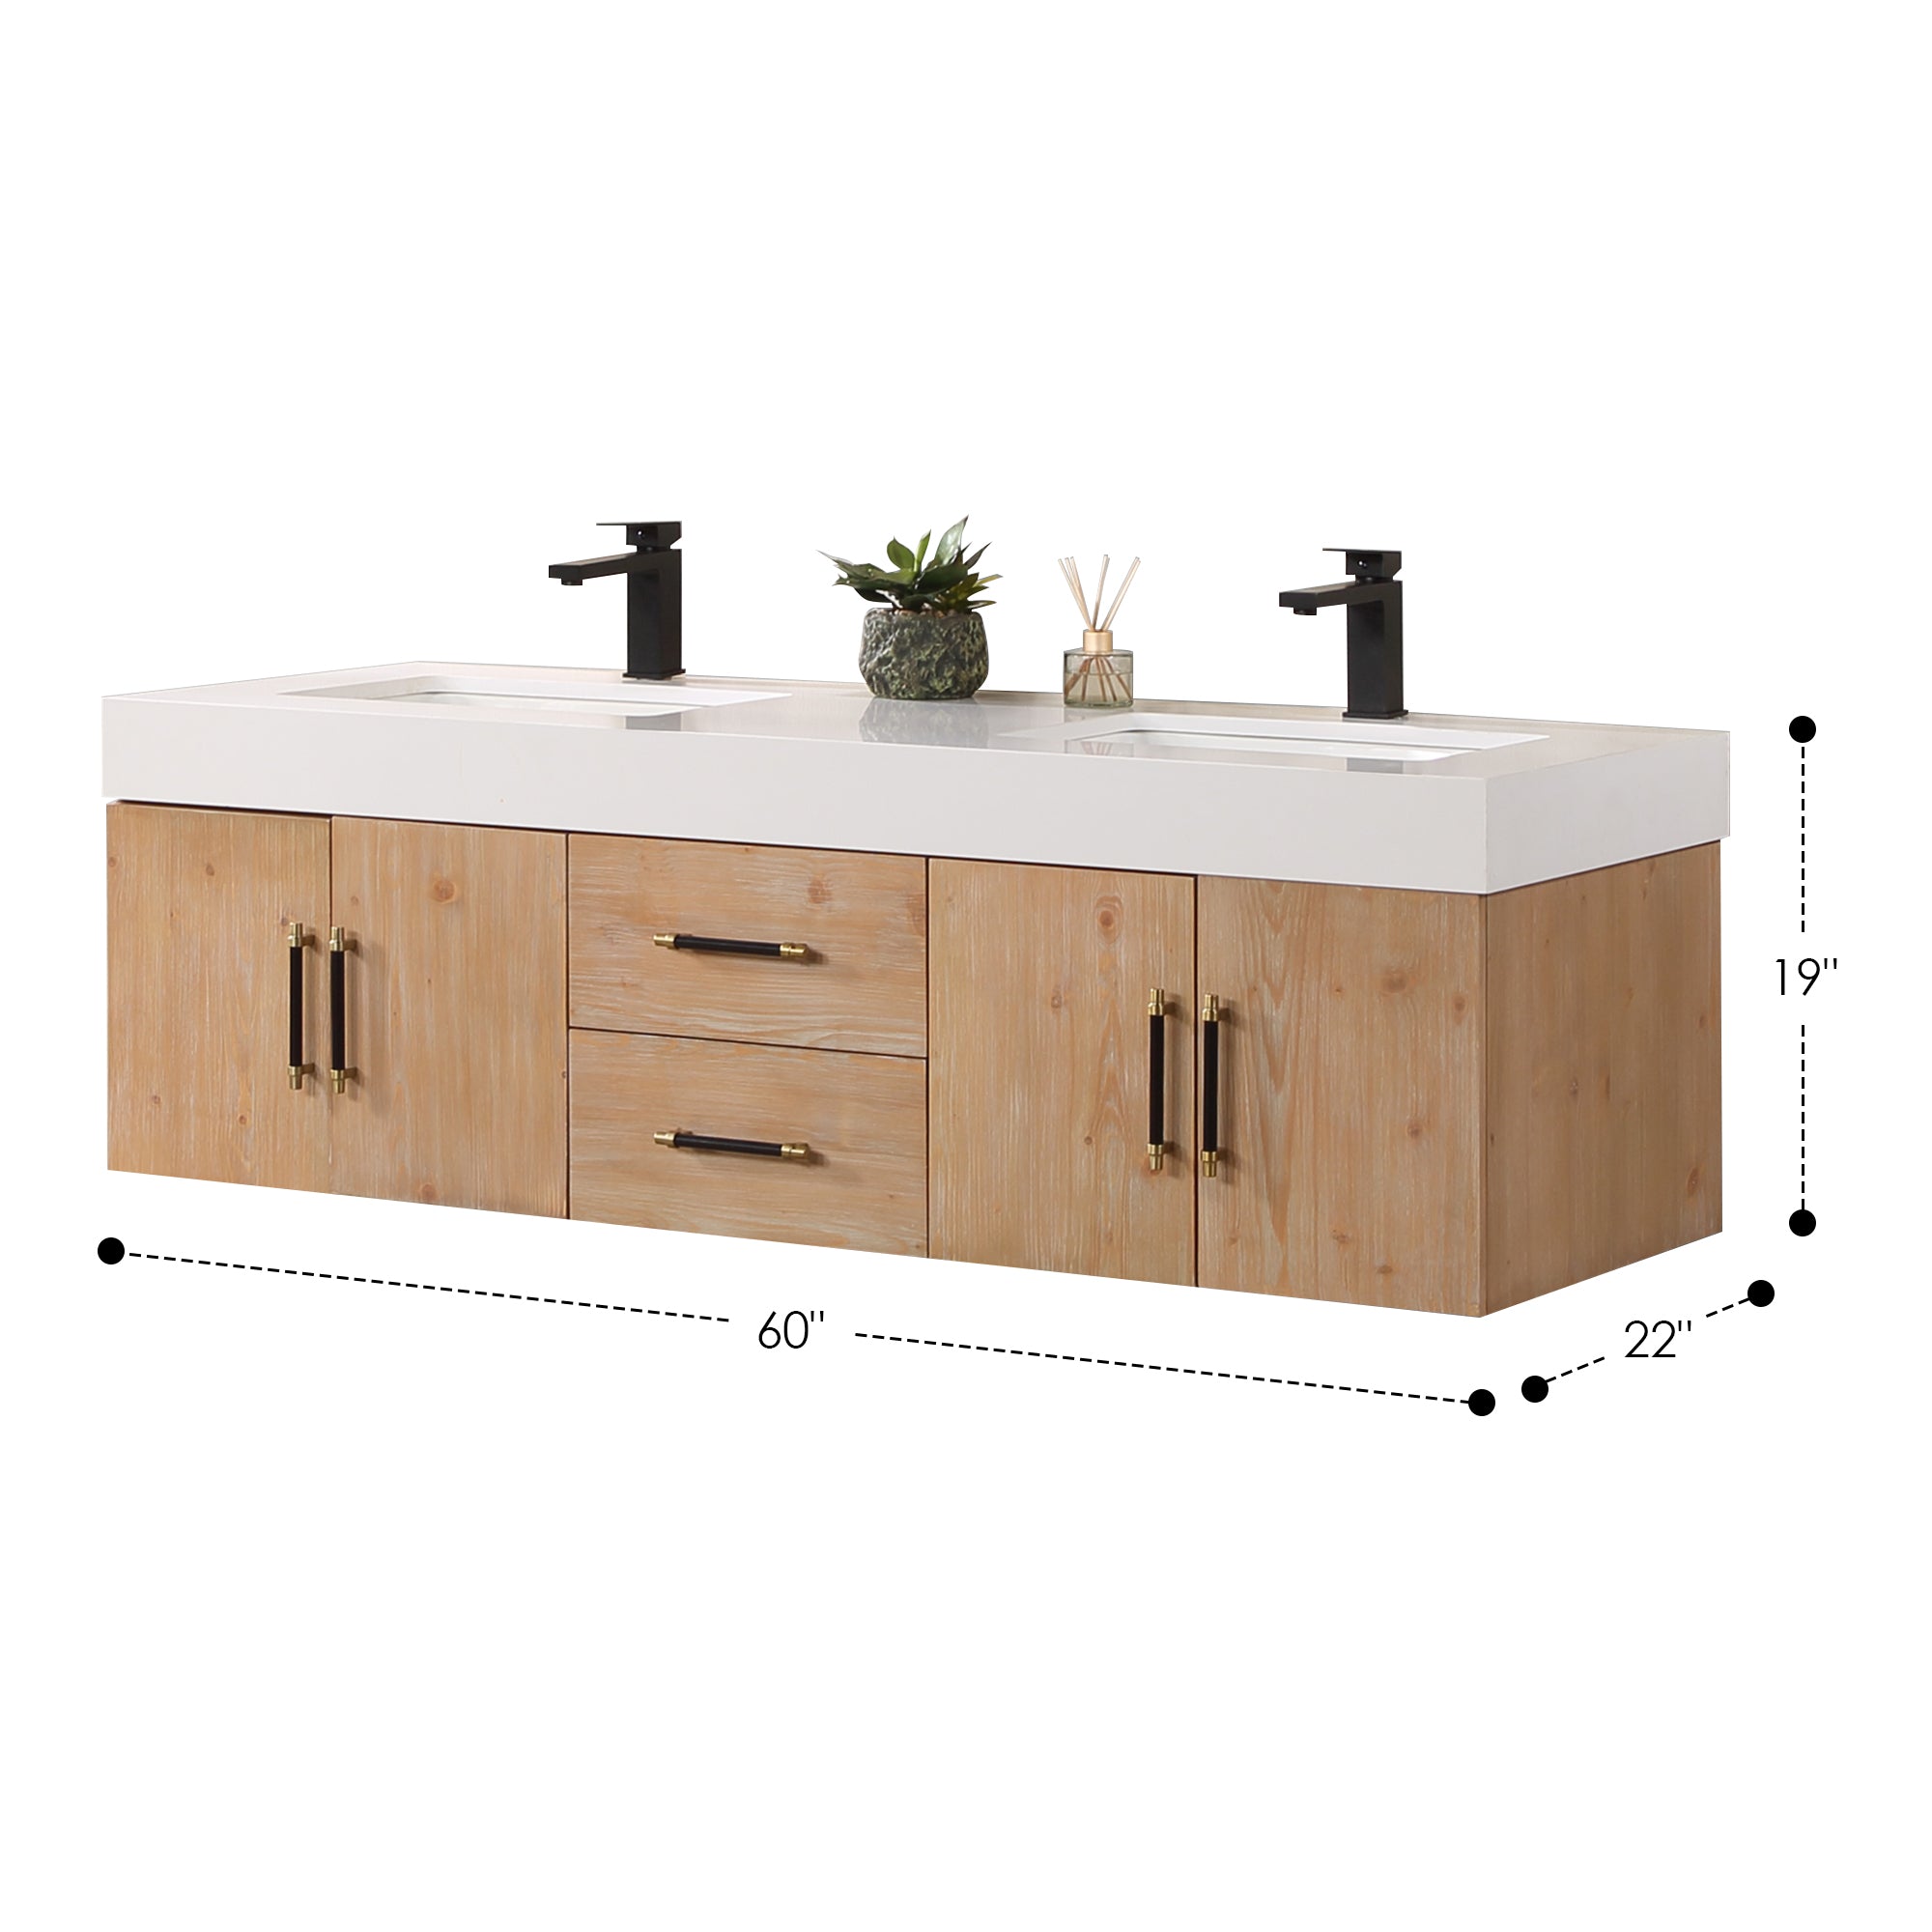 Corchia Wall-mounted Double Bathroom Vanity with White Composite Stone Countertop